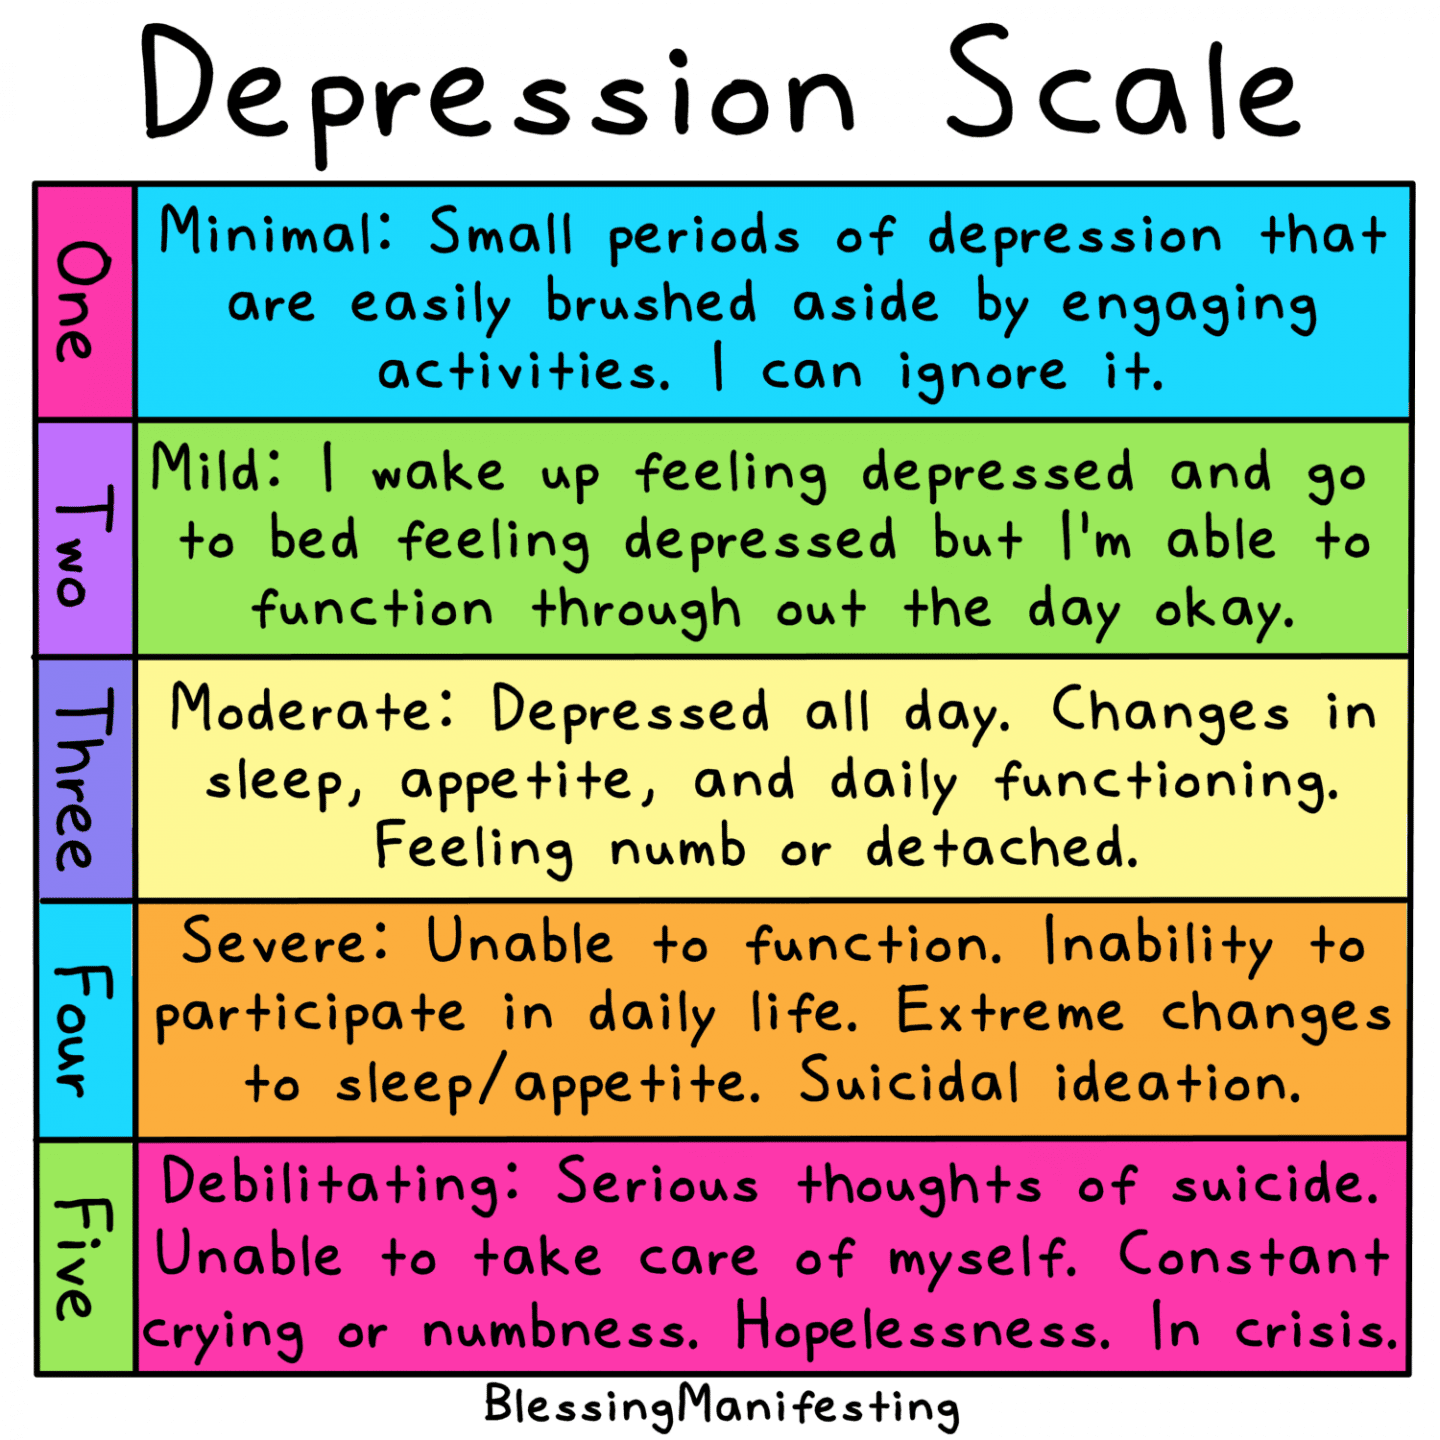 Depression Scale: What Level Are You At?